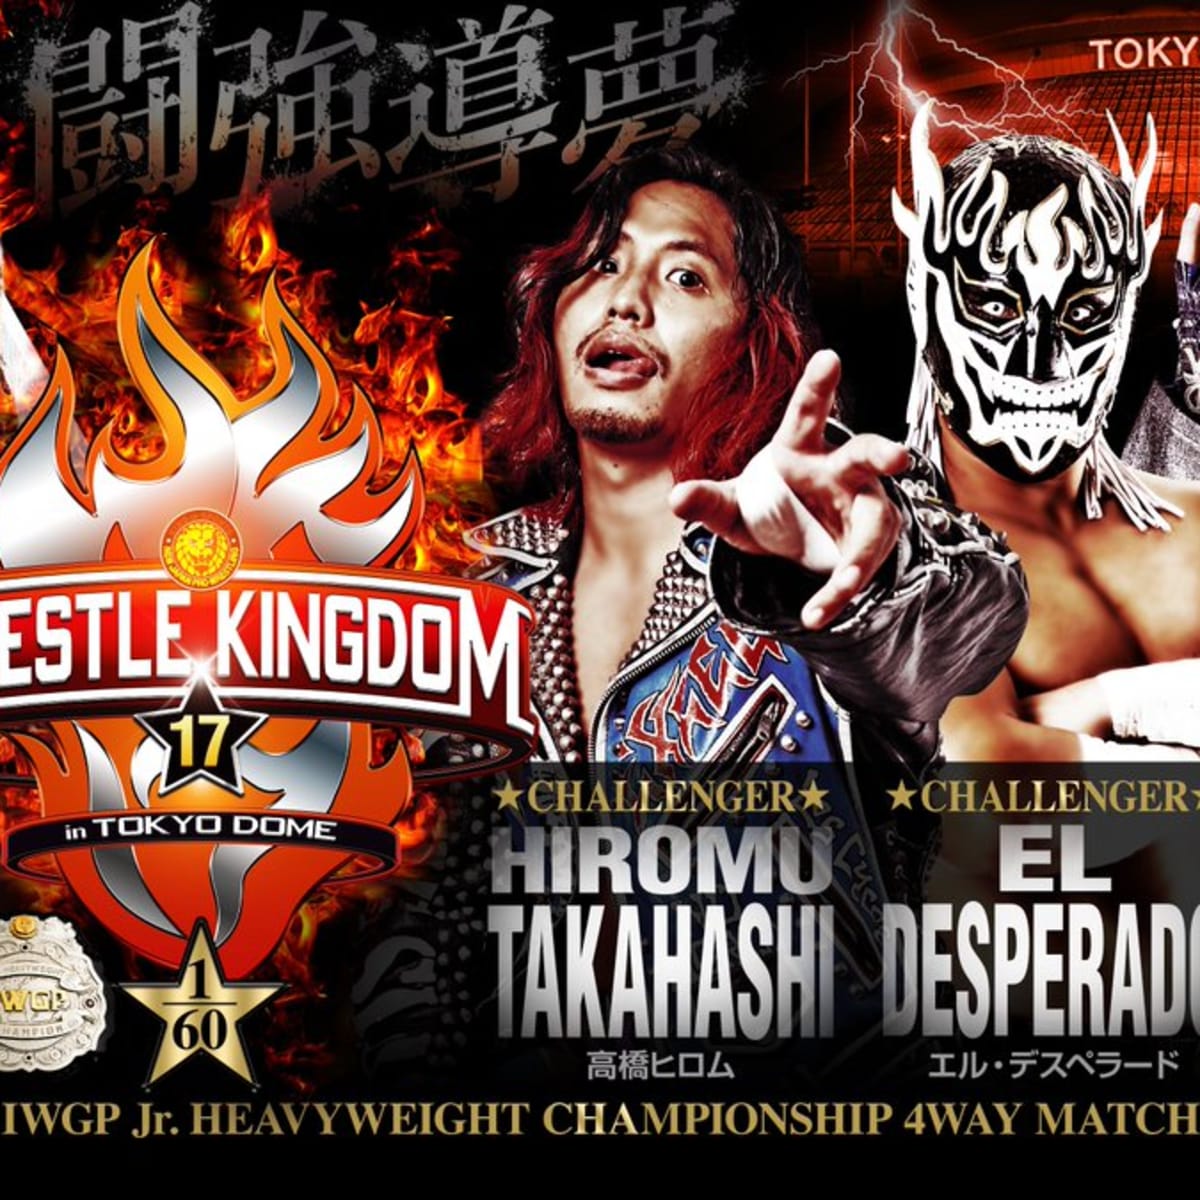 Two title matches announced for NJPW Wrestle Kingdom 17 - WON/F4W 